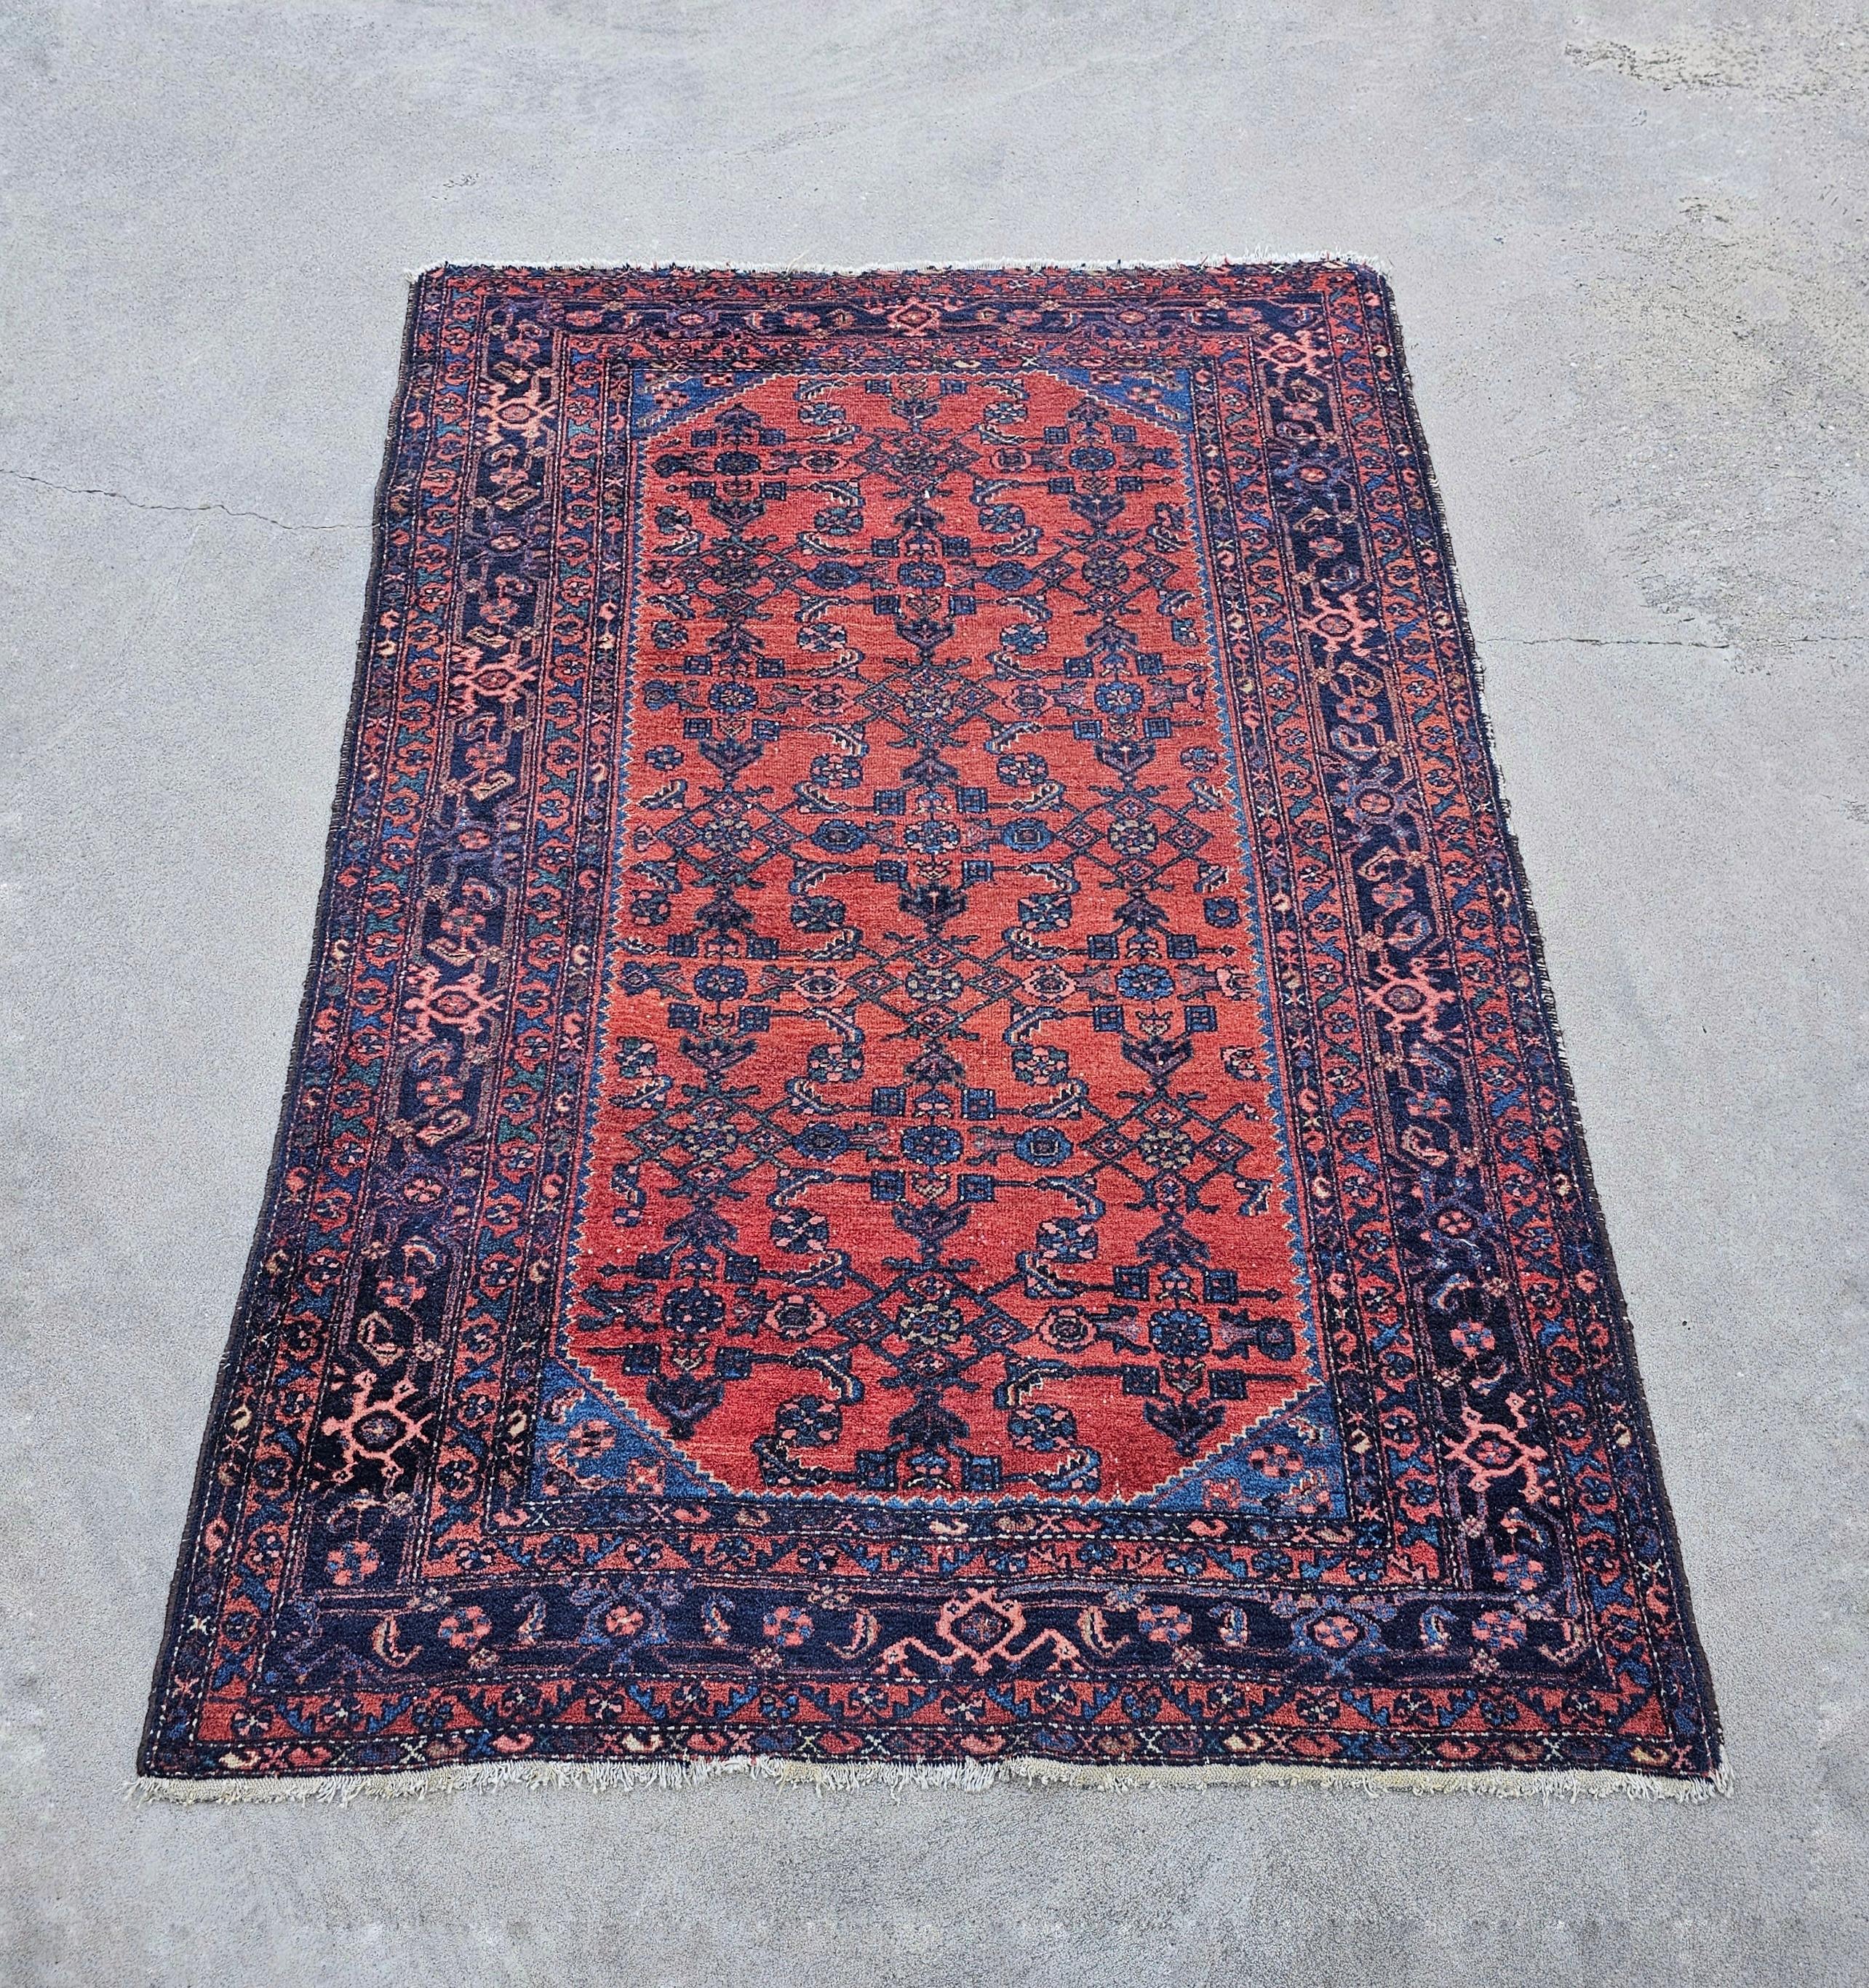 In this listing you will find an antique Baluch Rug with beautiful floral patterns and vibrant colours. It was hand-knotted in the end of 19th century. The rug is made of 100% wool.

The rug is in good antique condition. It shows some signs of time